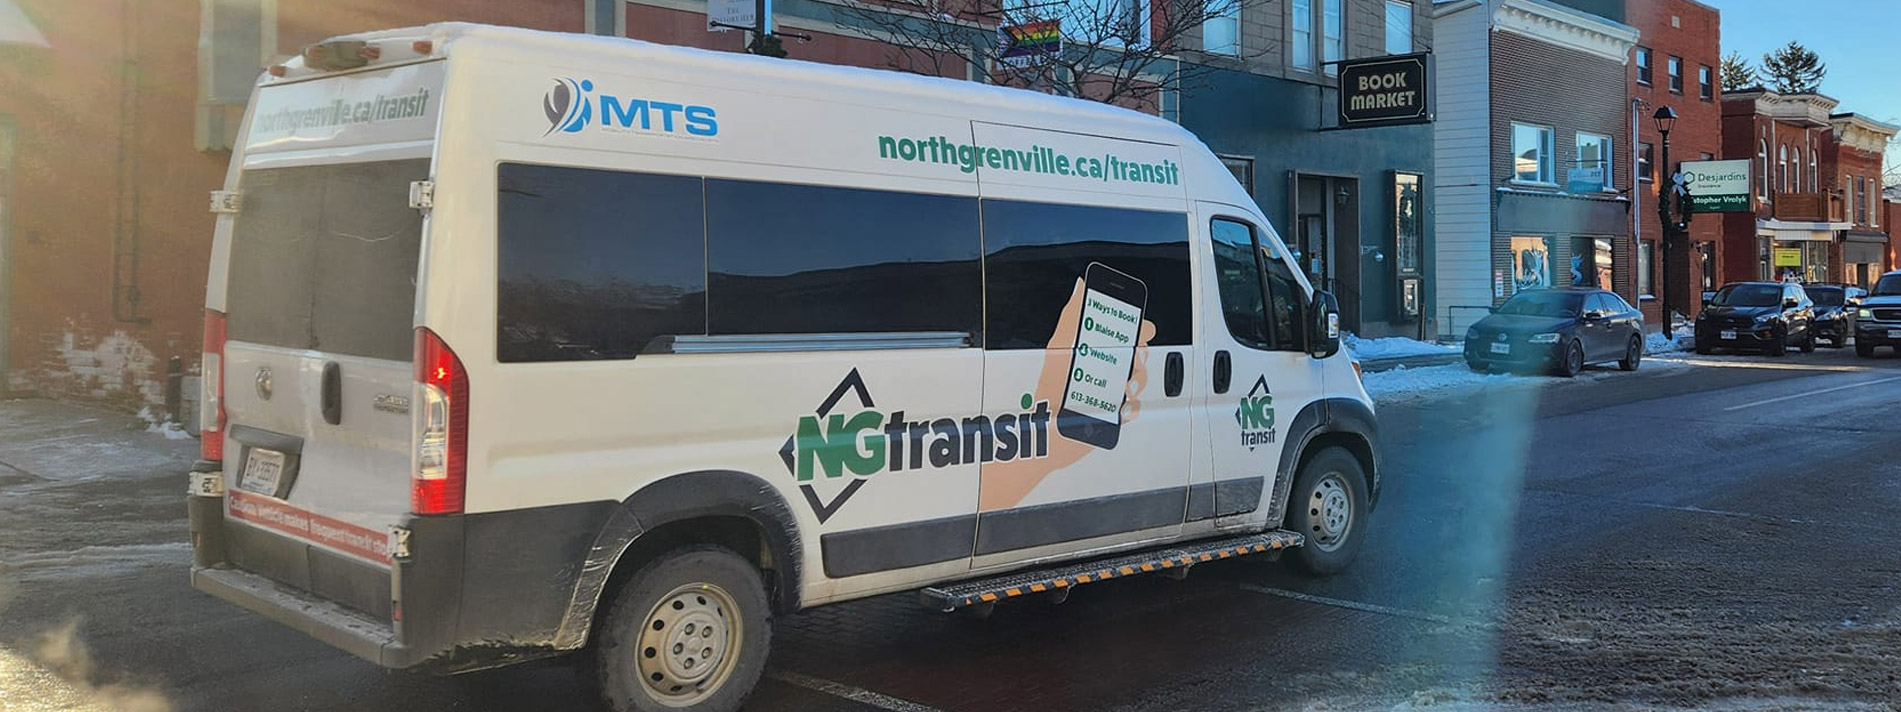 North Grenville’s New Transit System